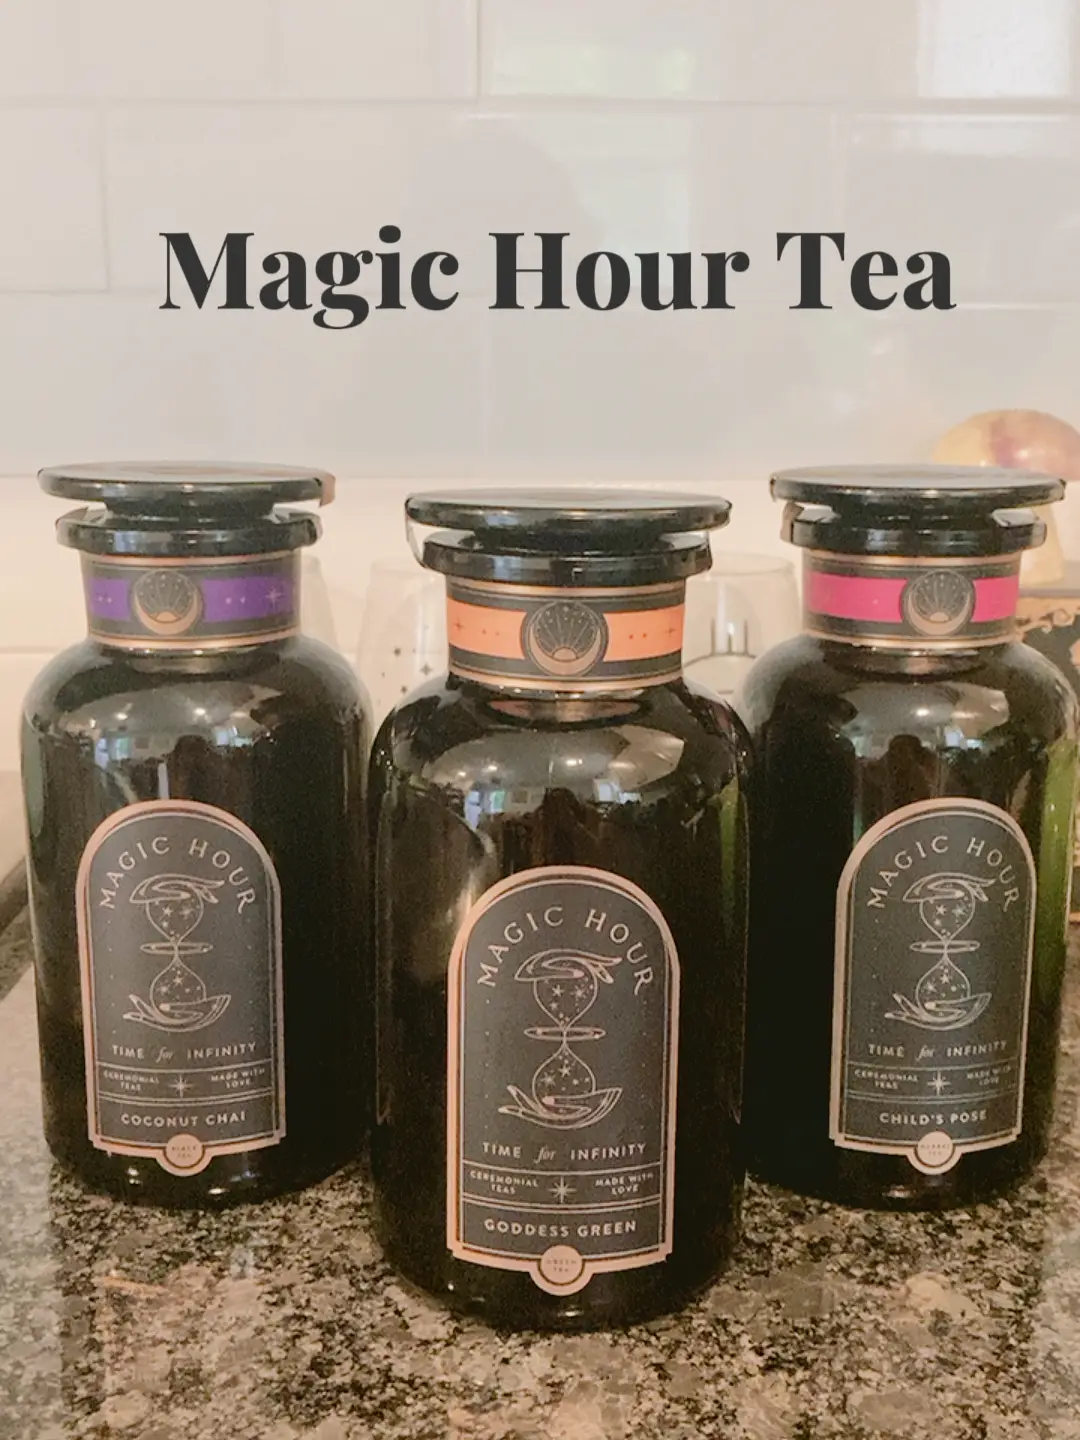 Tuesday tea-time! 🫖 Check out our amazing line up of hot teas